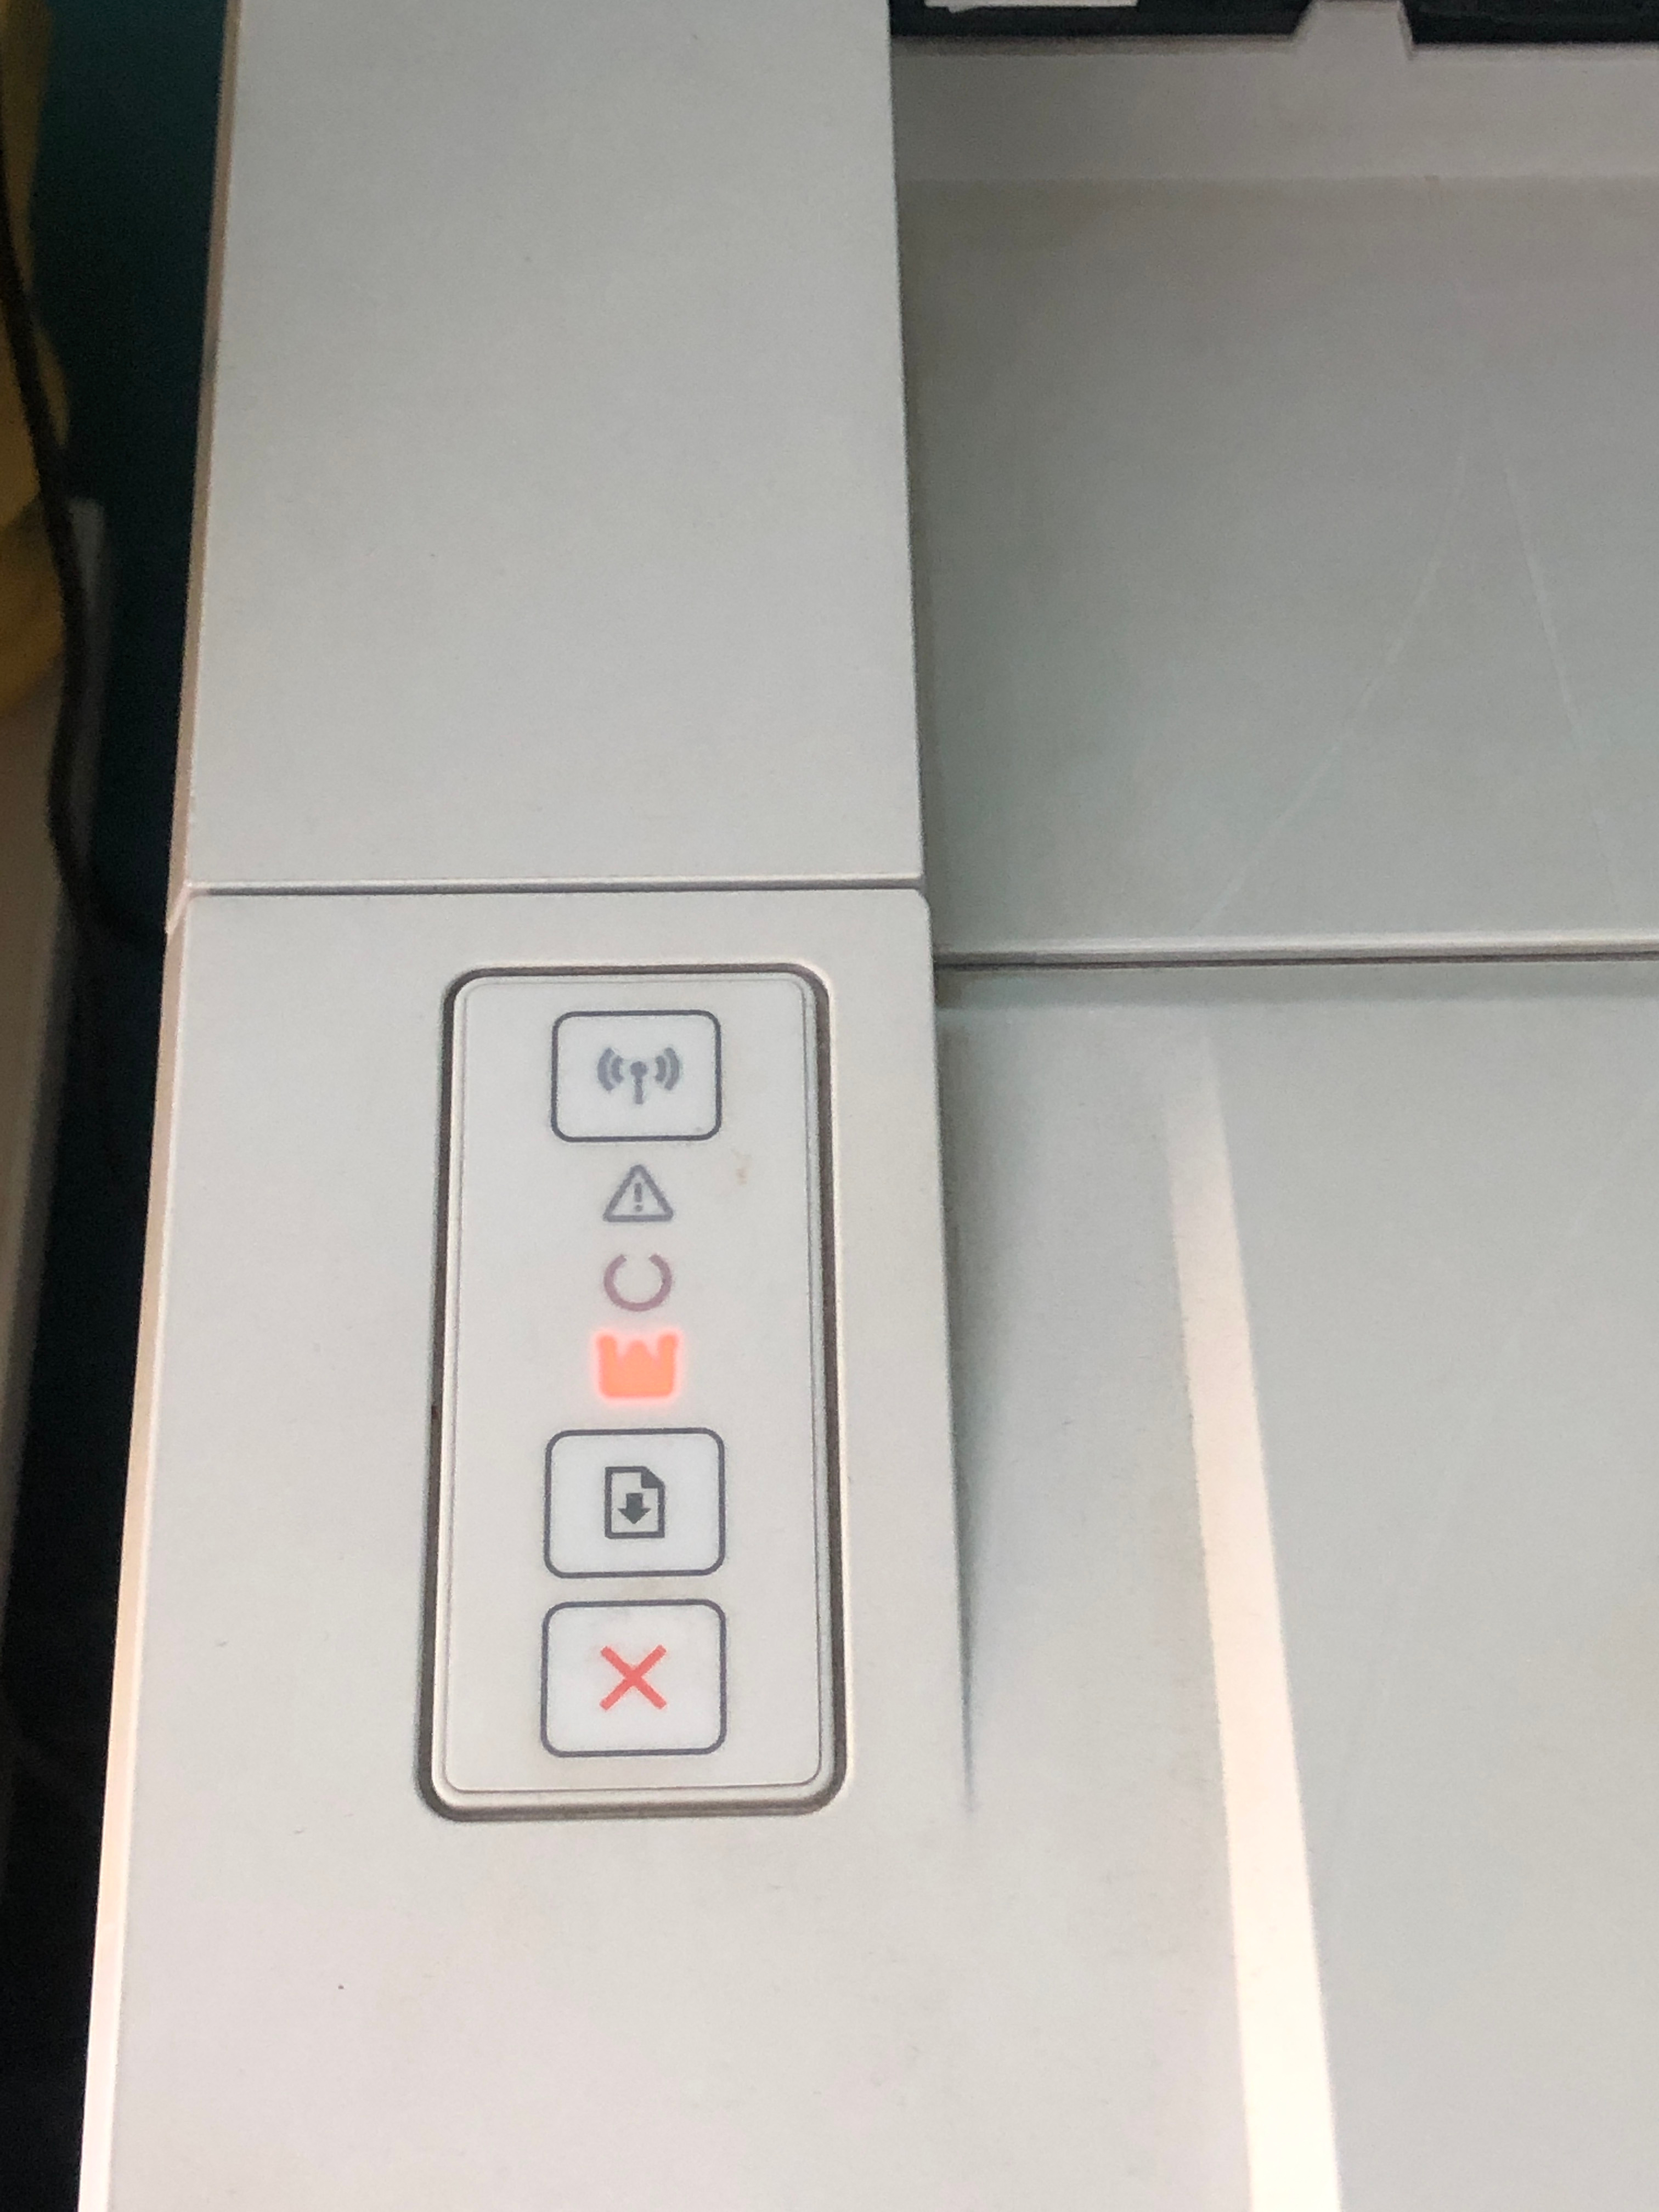 low ink light shows on printer even after replacement with a... - HP  Support Community - 8157875